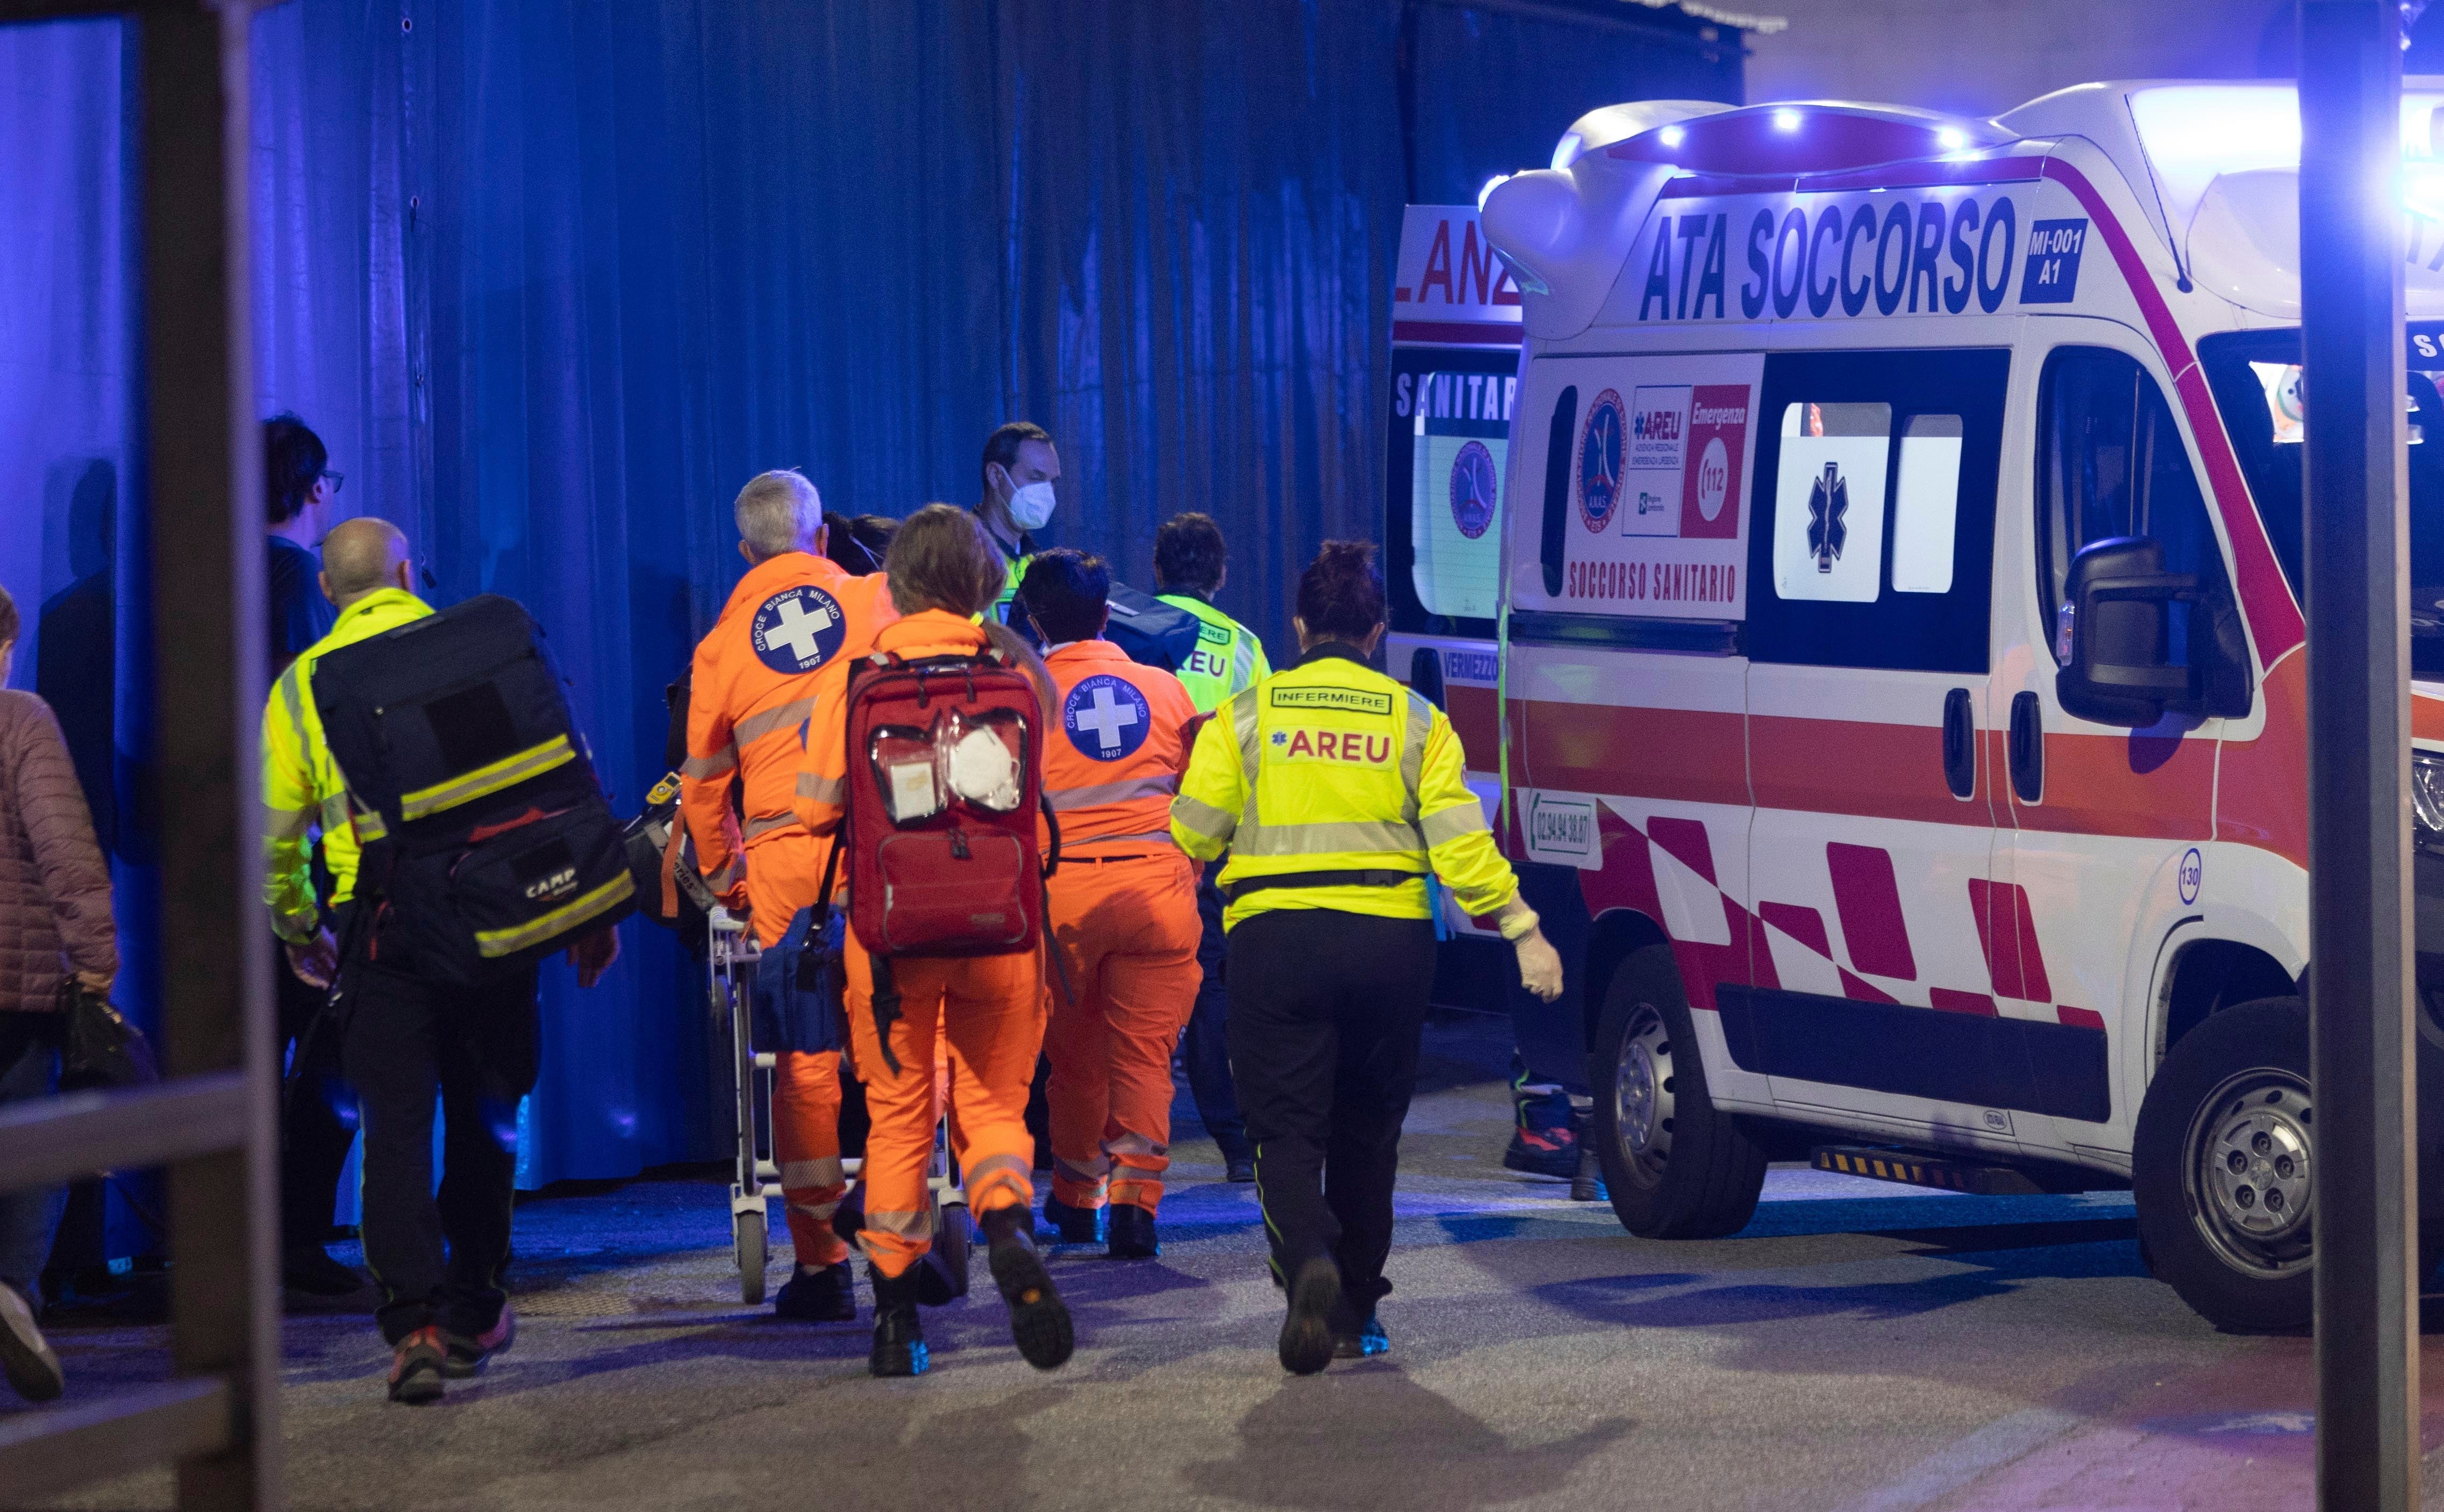 Five people were stabbed at a Carrefour supermarket in Milan